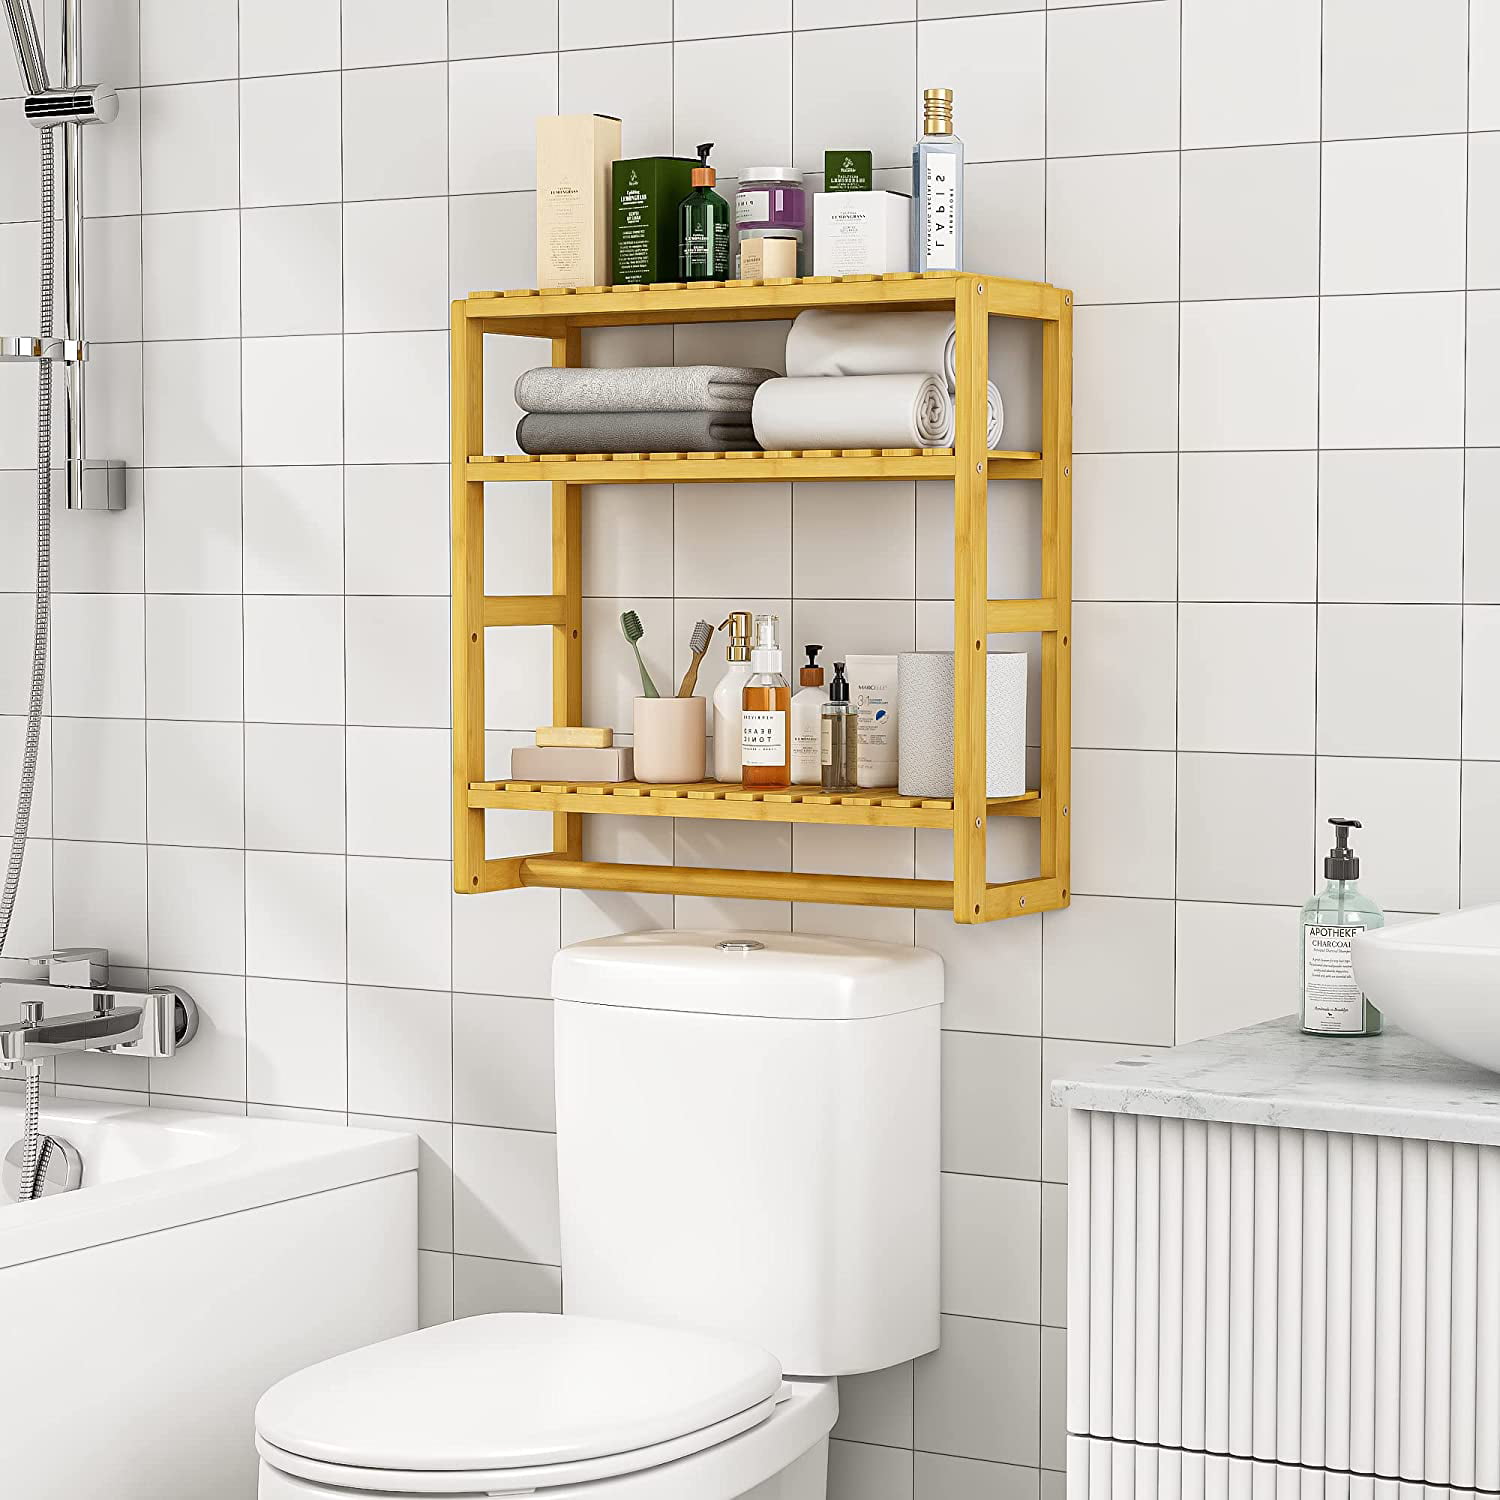 Bamboo Bathroom Shelves Organizer Shelves for Storage Black Adjustable 3 Tiers Floating Shelf Over The Toilet Storage with Hanging Rod